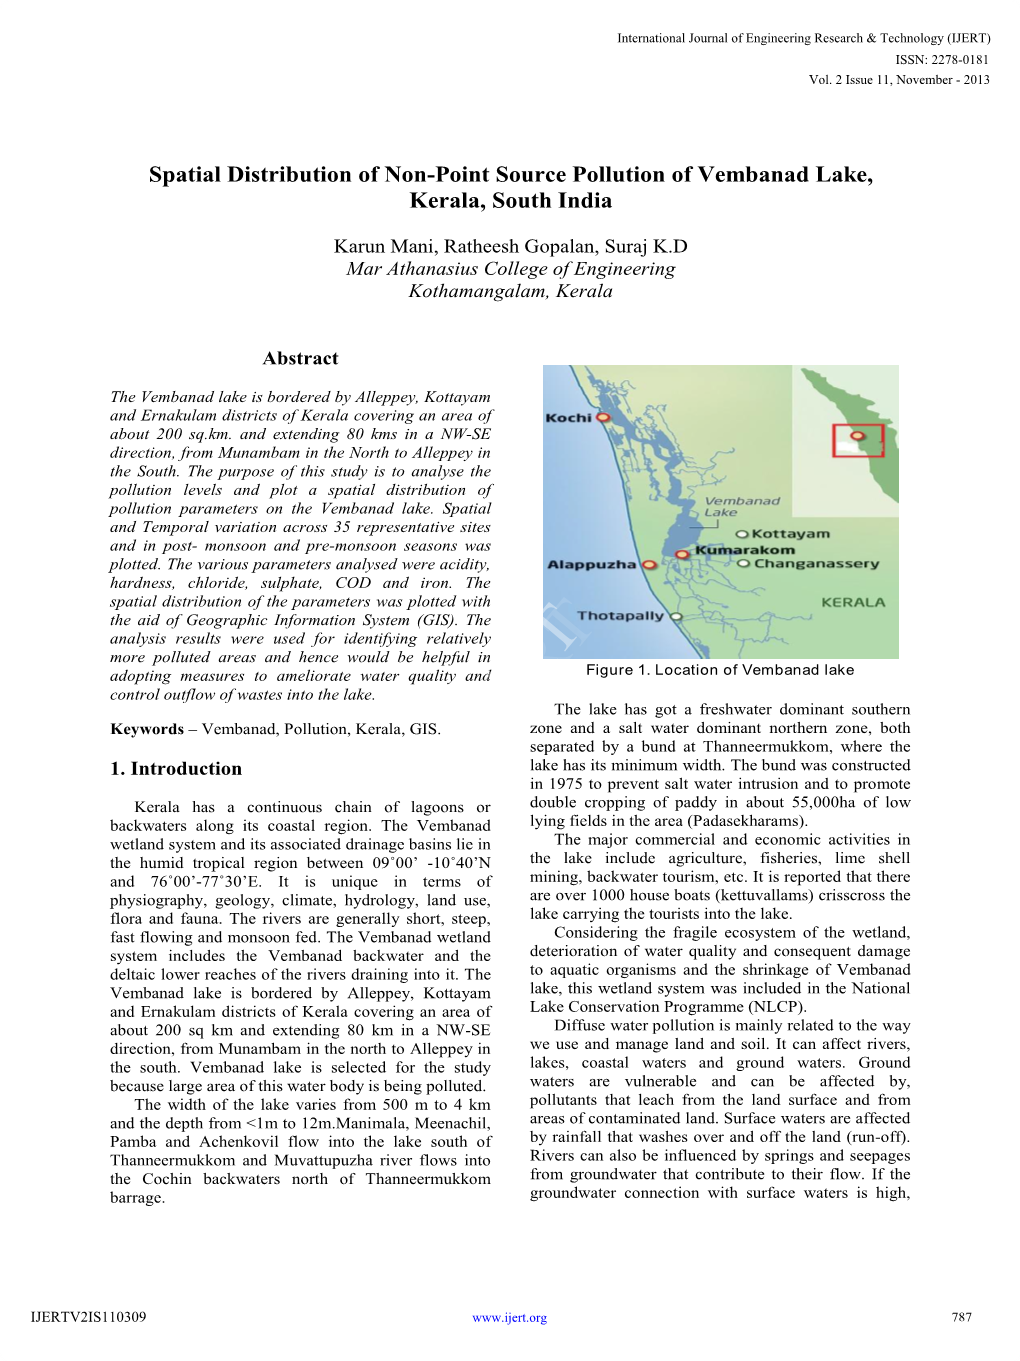 Spatial Distribution of Non-Point Source Pollution of Vembanad Lake, Kerala, South India